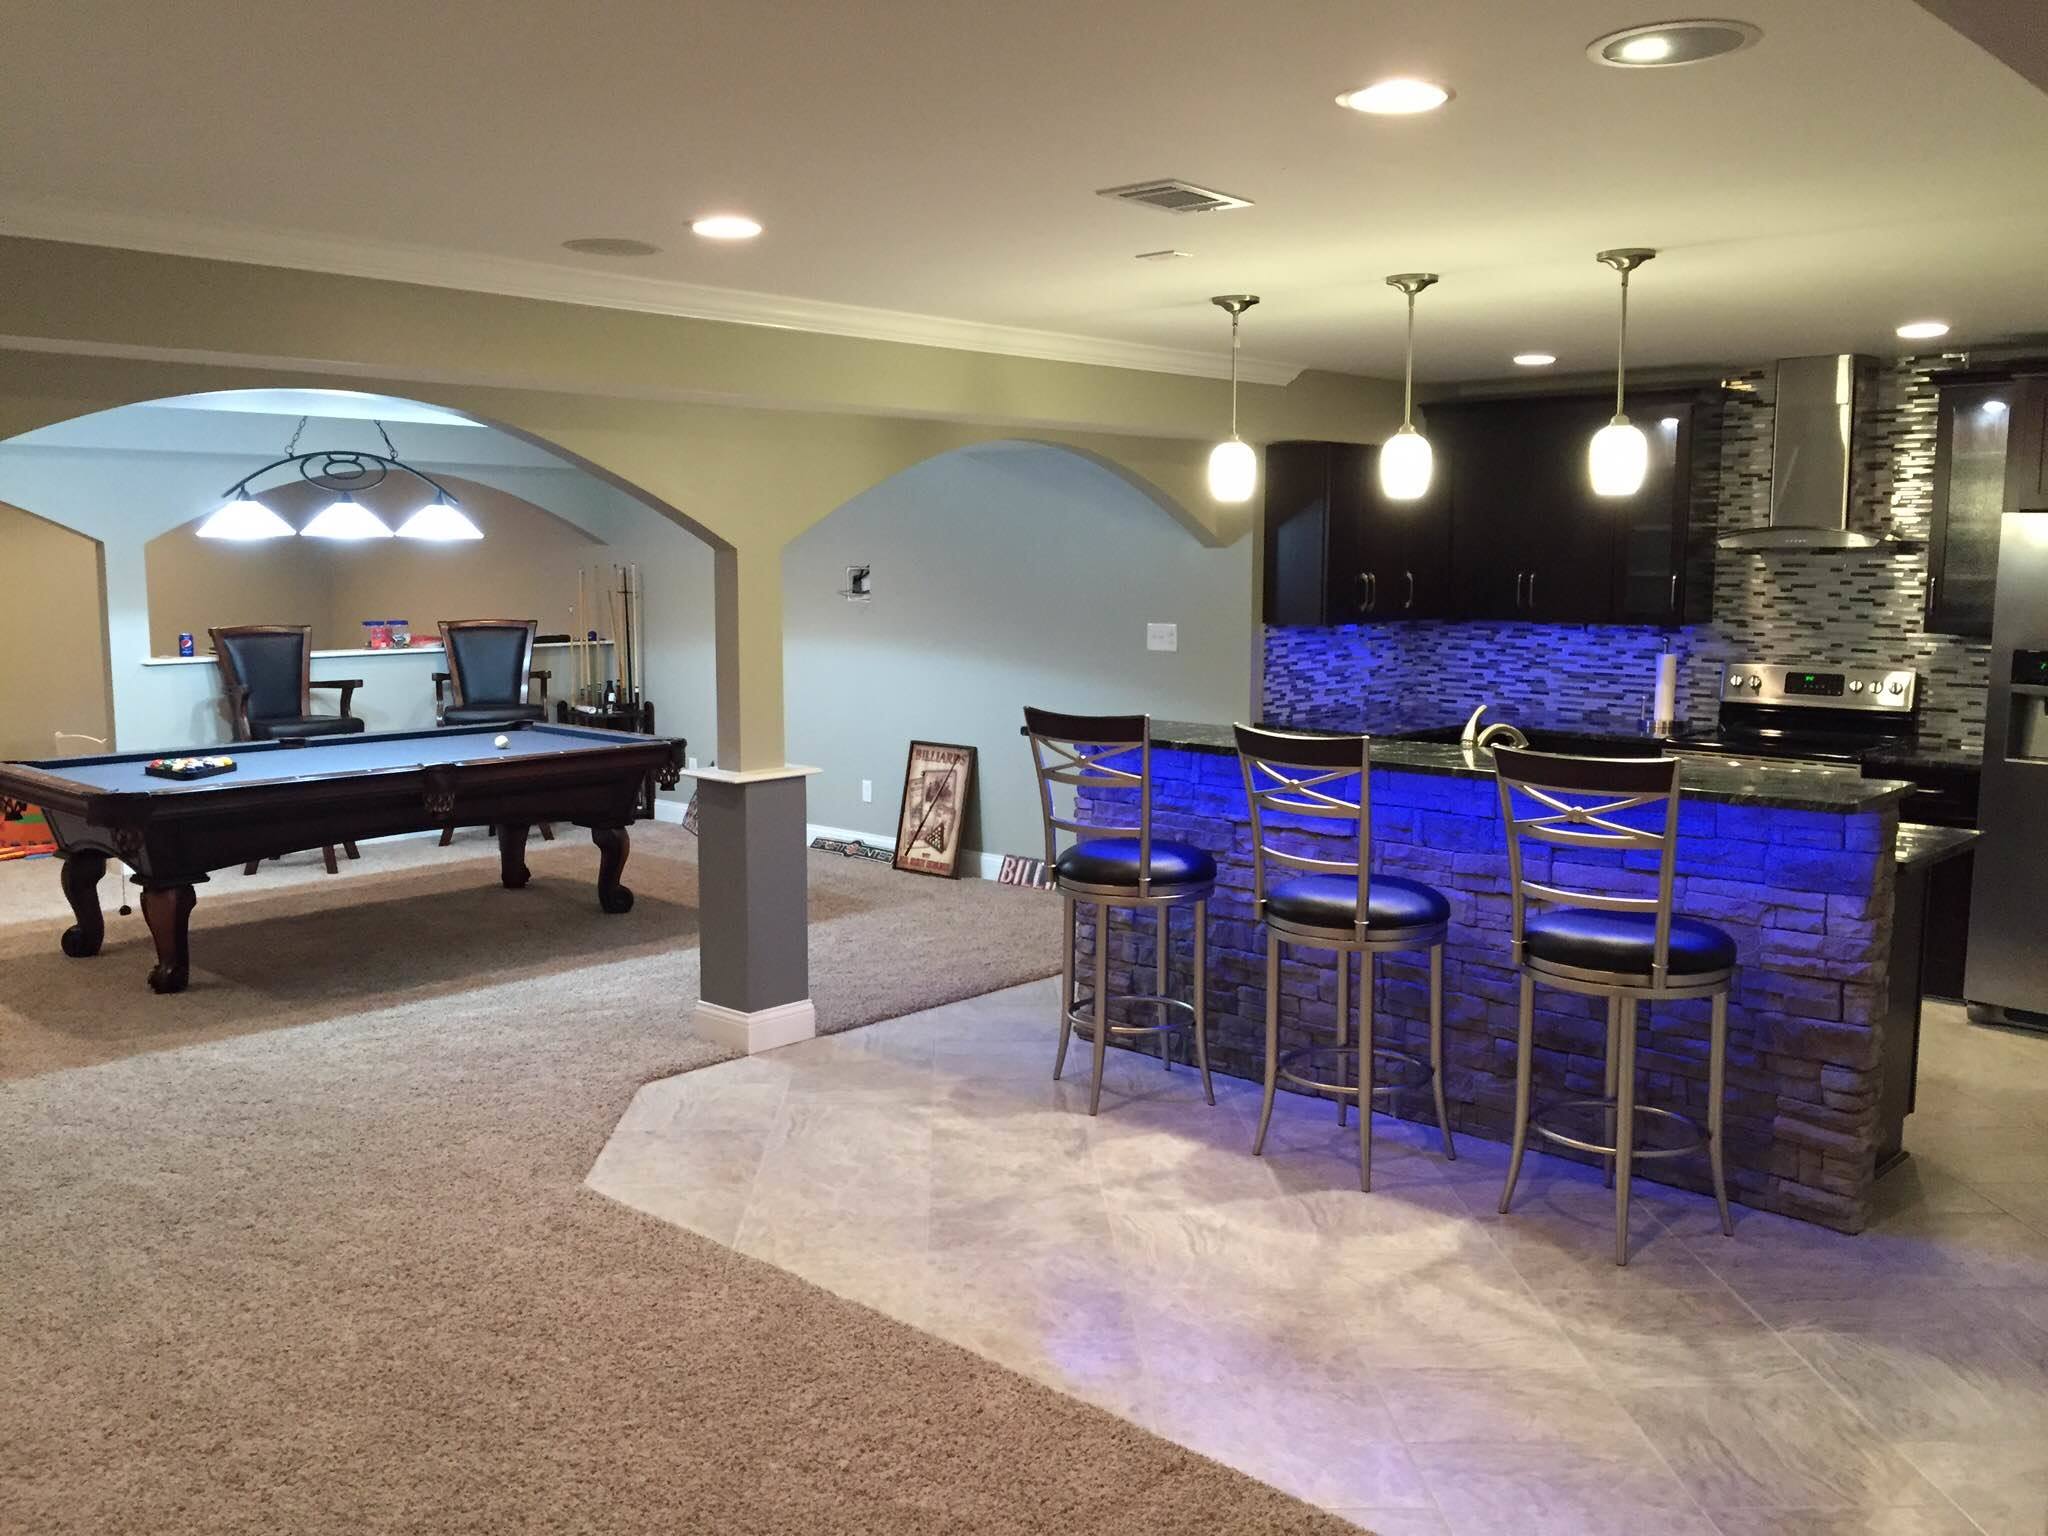 If you are thinking about basement finishing in Louisville, this is a great way to gain additional living space.